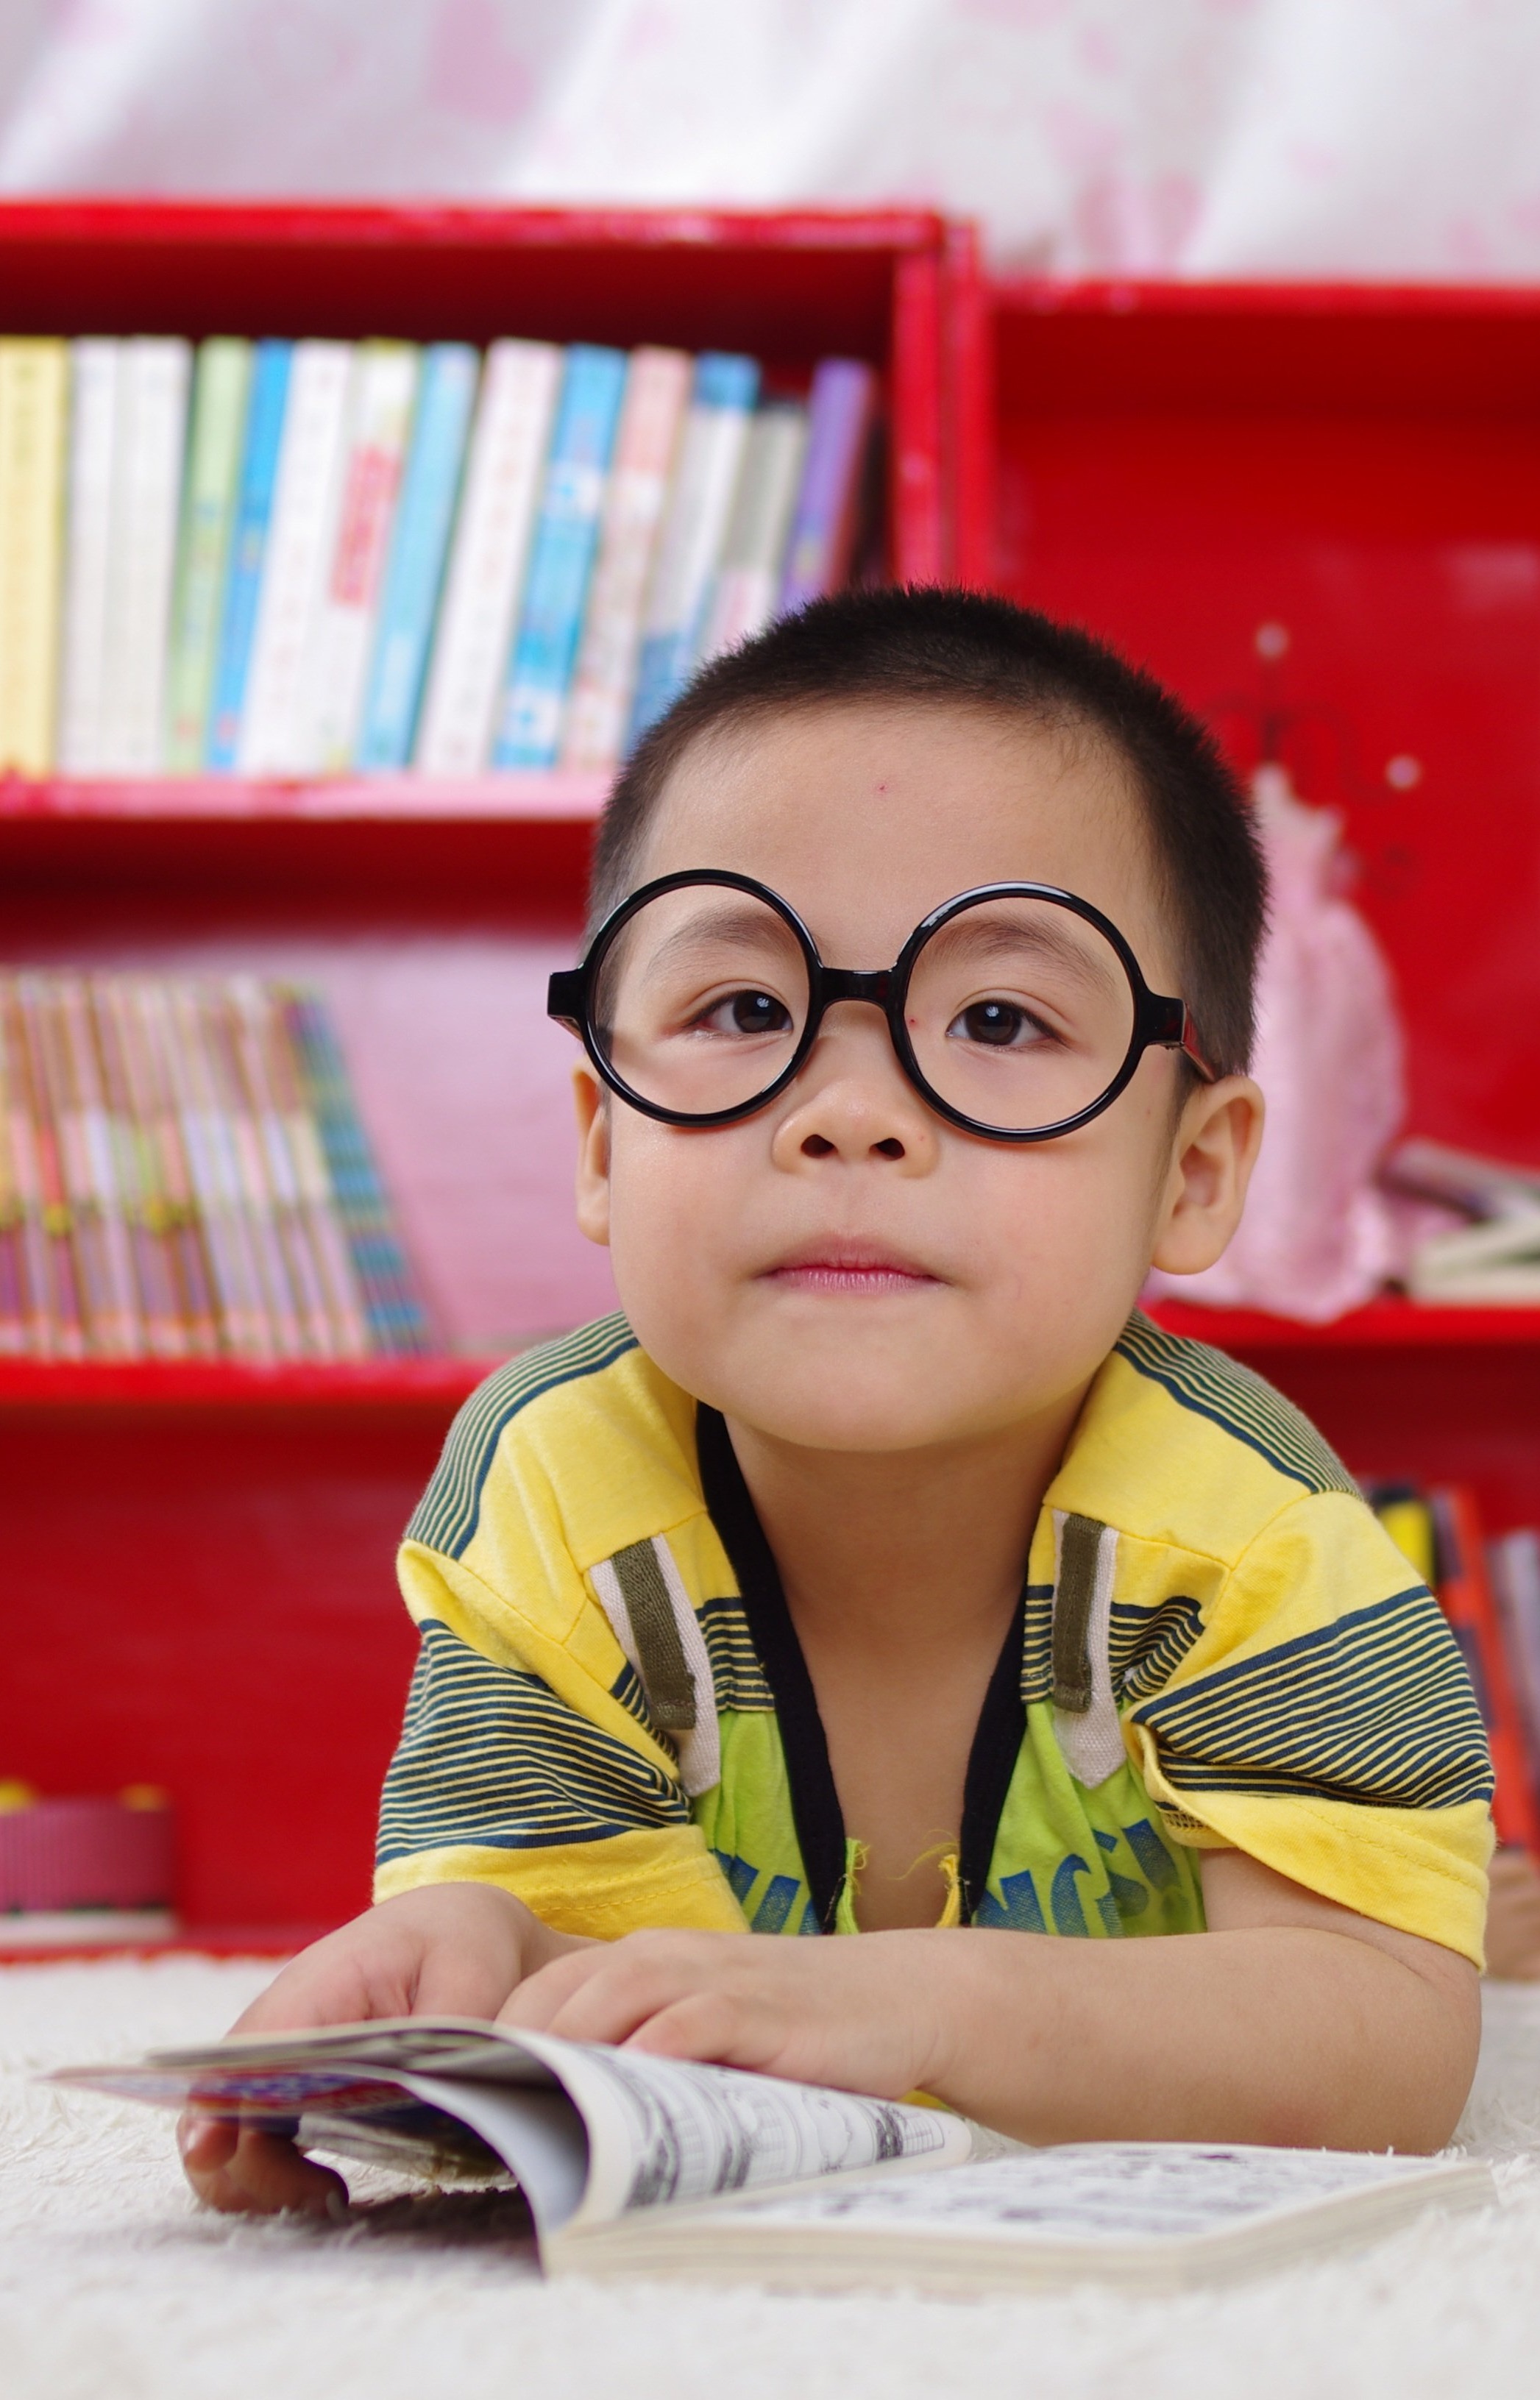 Adorable boy with glasses reading a book.